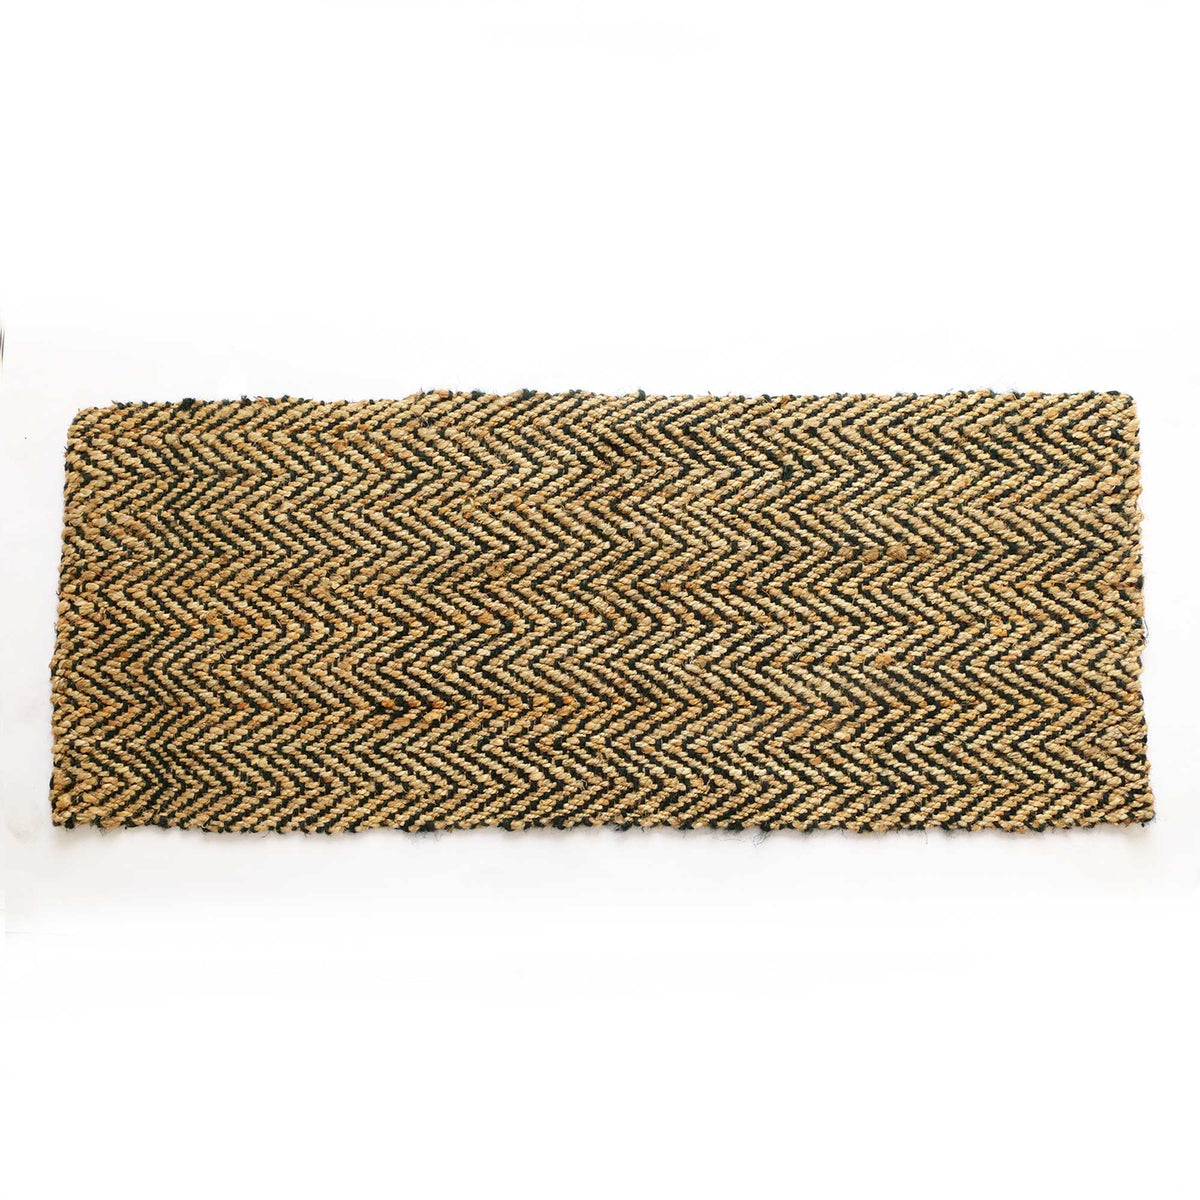 OnlyMat Ups and Downs - Luxe Rug - Herringbone Weave - Handwoven Jute Carpet - Organic and Sustainable